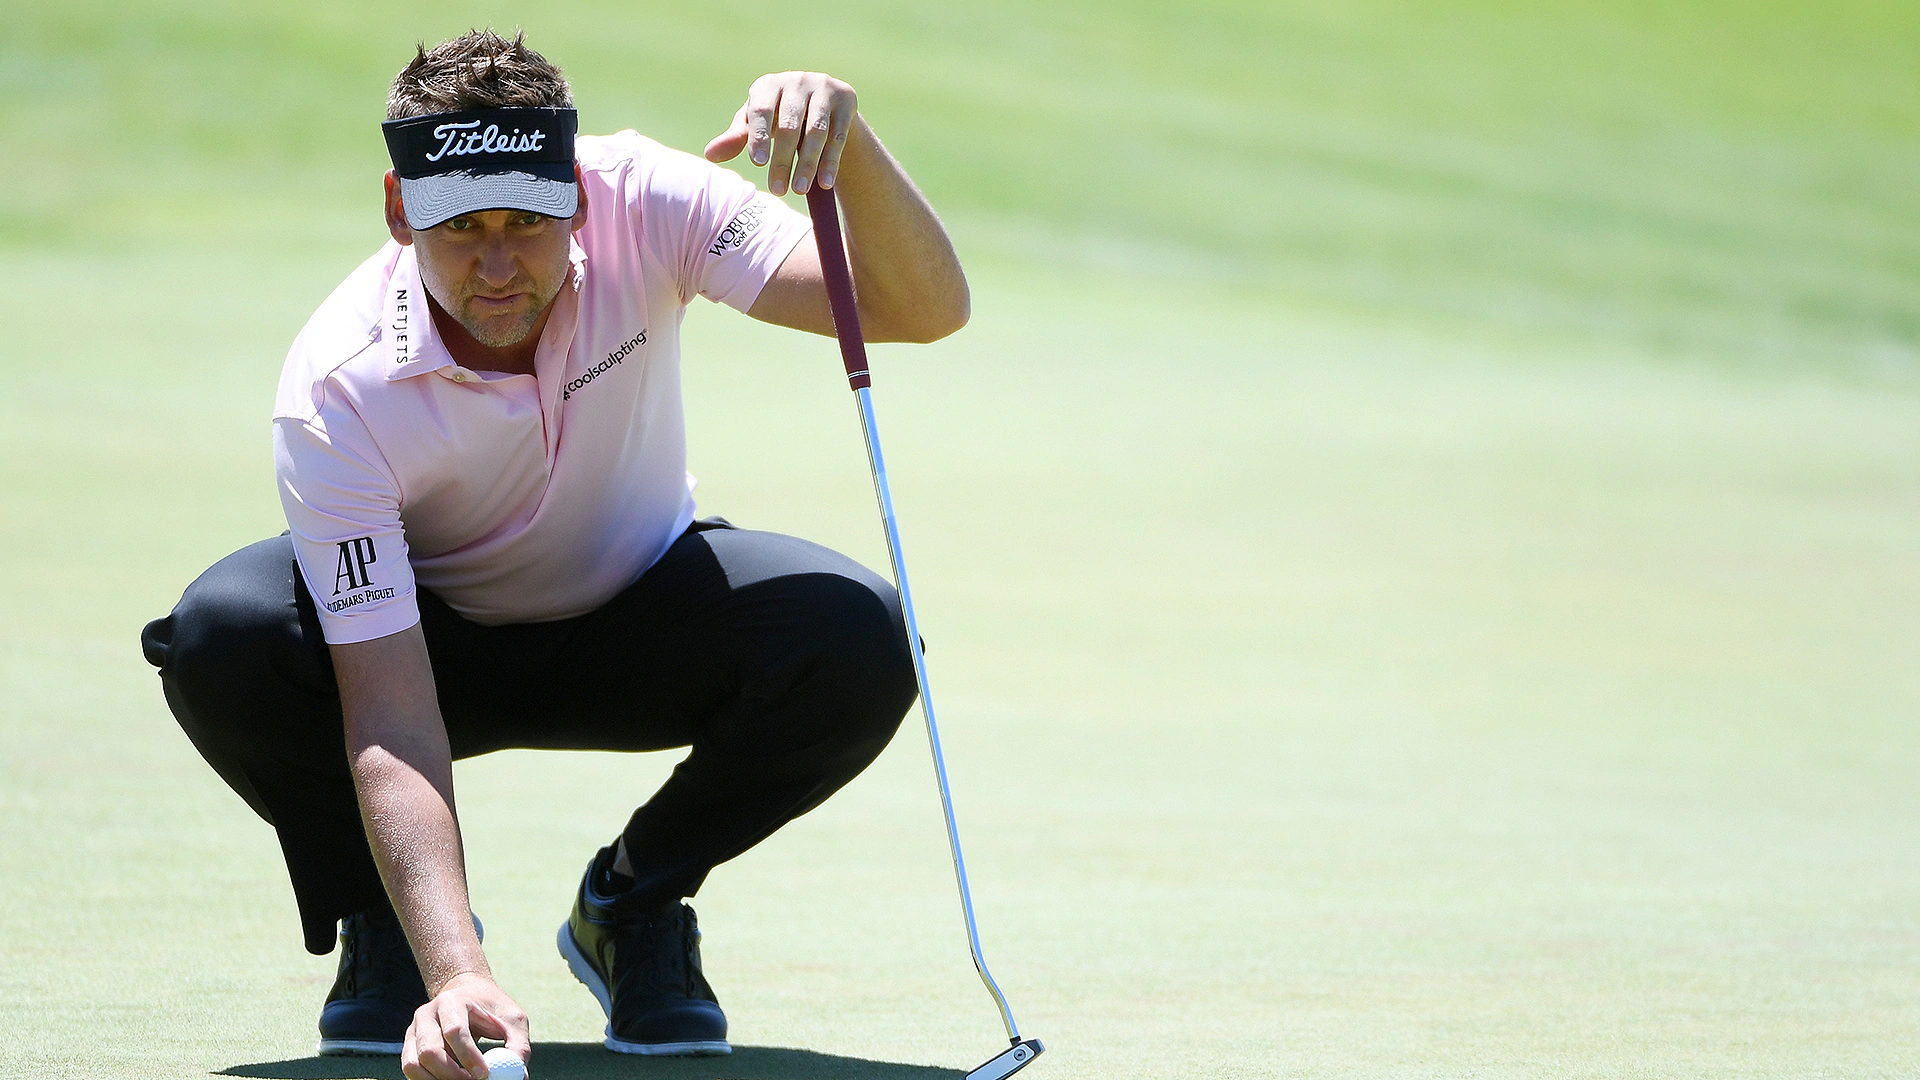 Poulter finally has a positive U.S. Open experience